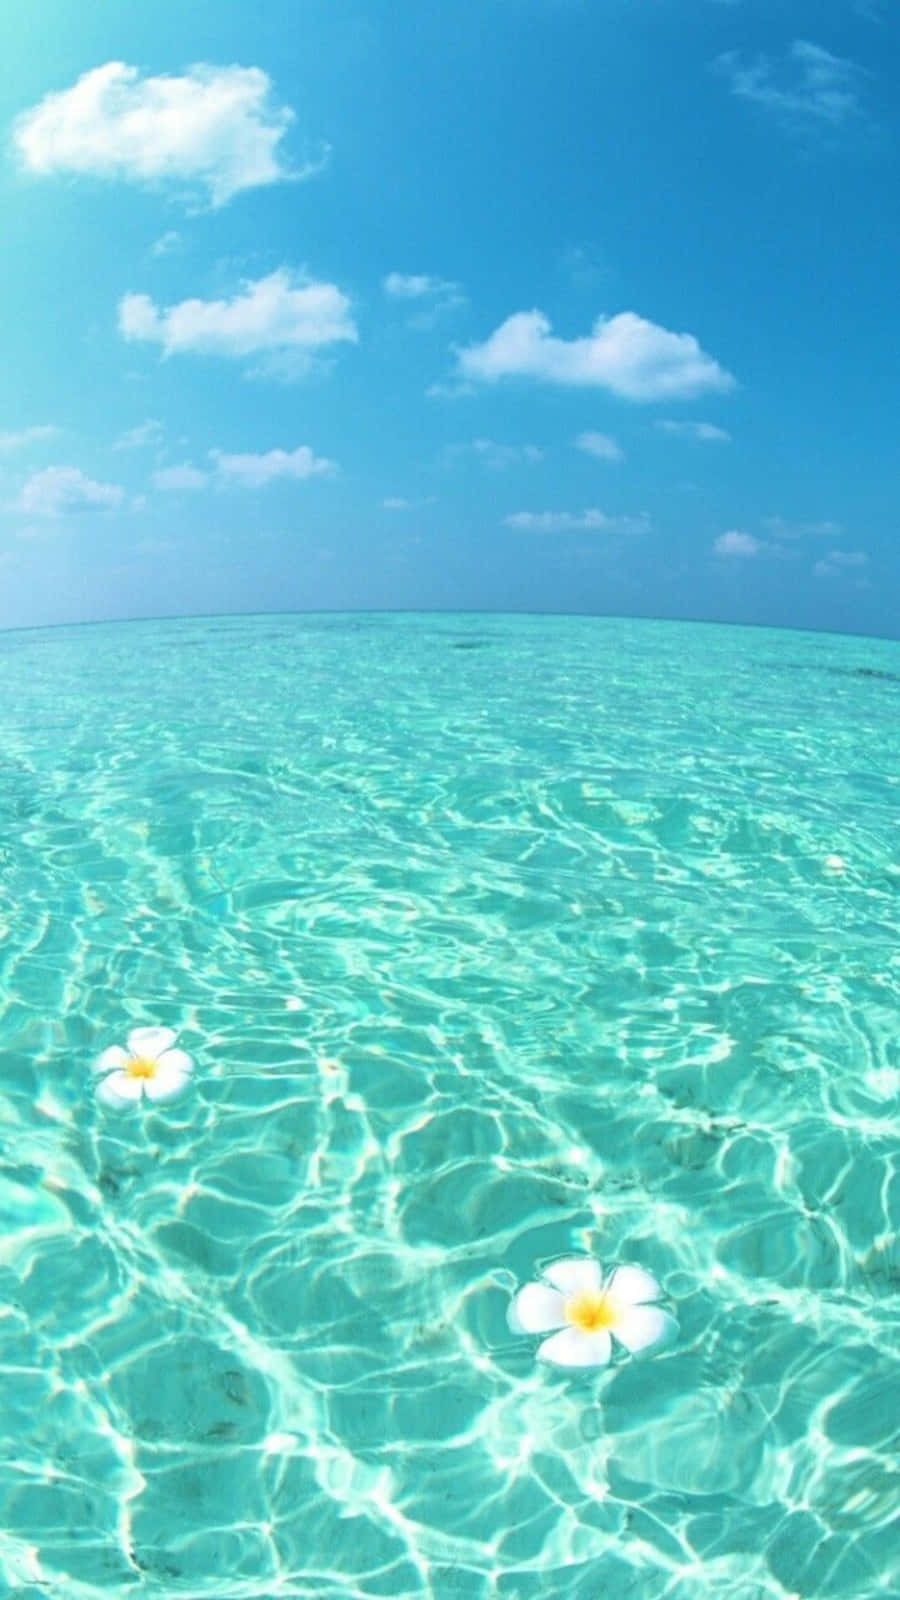 A Clear Blue Ocean With White Flowers Floating In The